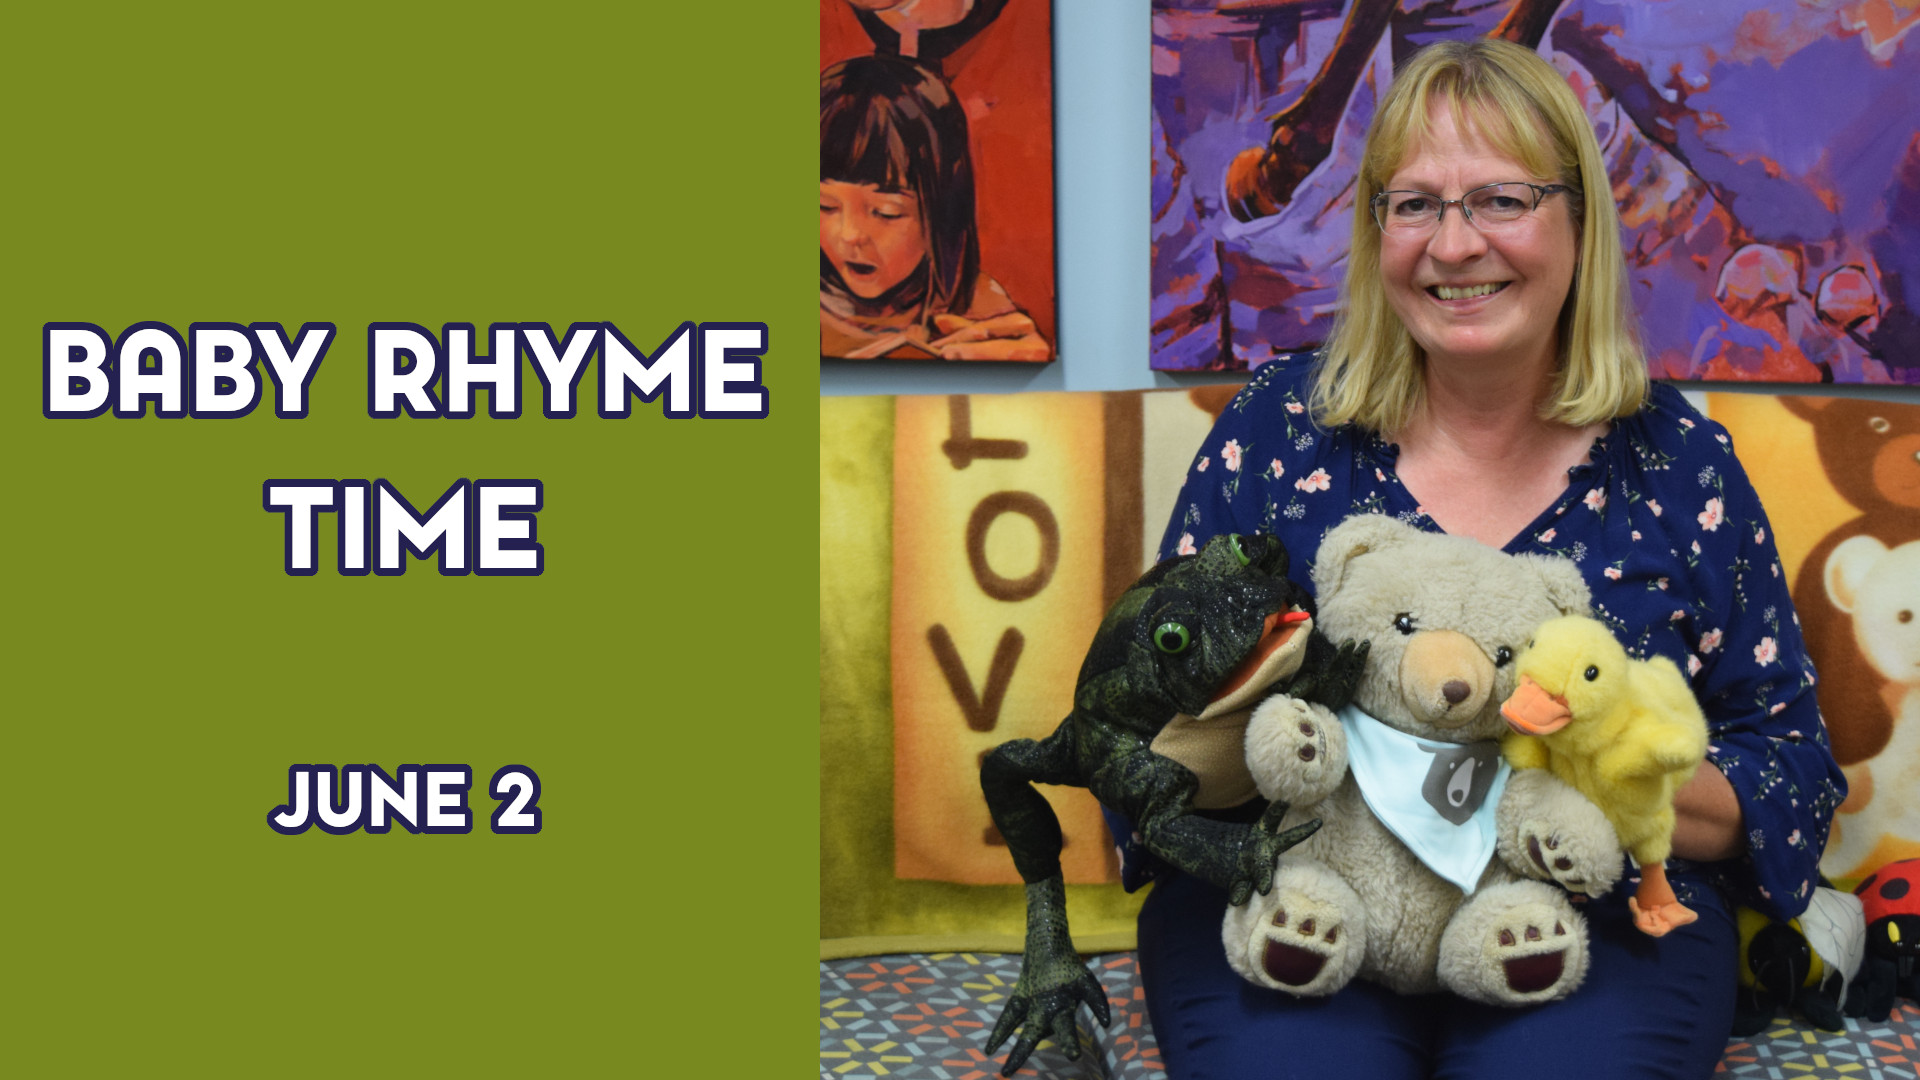 A woman holds stuffed animals next to the text "Baby Rhyme Time June 2"